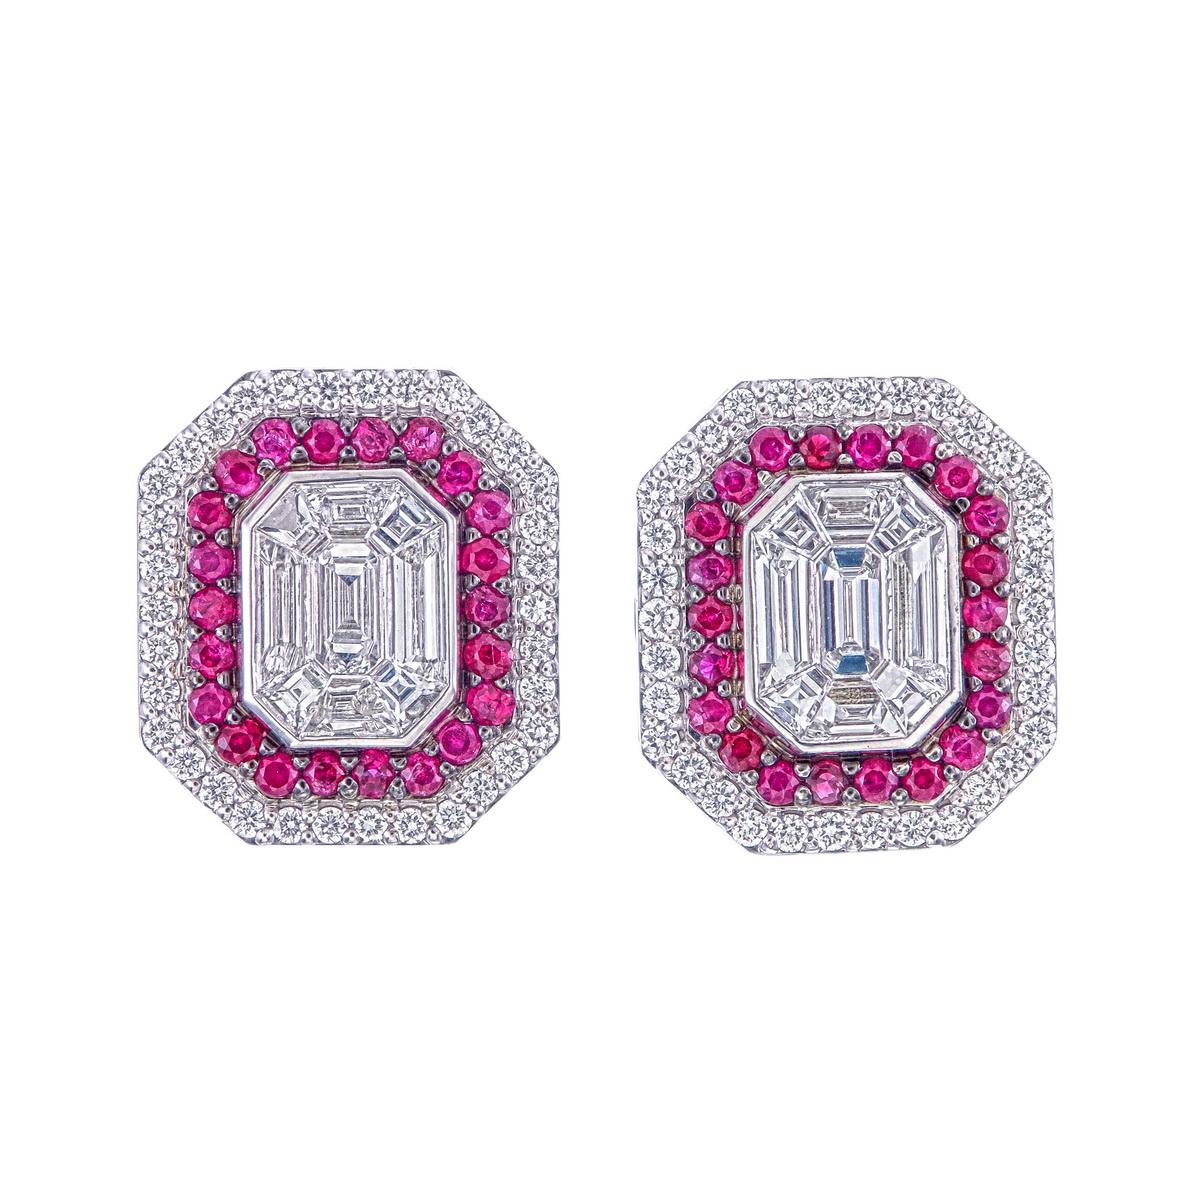 This pair of earrings is made with 1.40 carat diamonds in composite Invisible setting giving a look of 6 carat pair.
VVS clarity ,EF color diamonds are used 
Extremely light on ears 
6 carat pair of emerald cut diamonds are worth over  10 times the